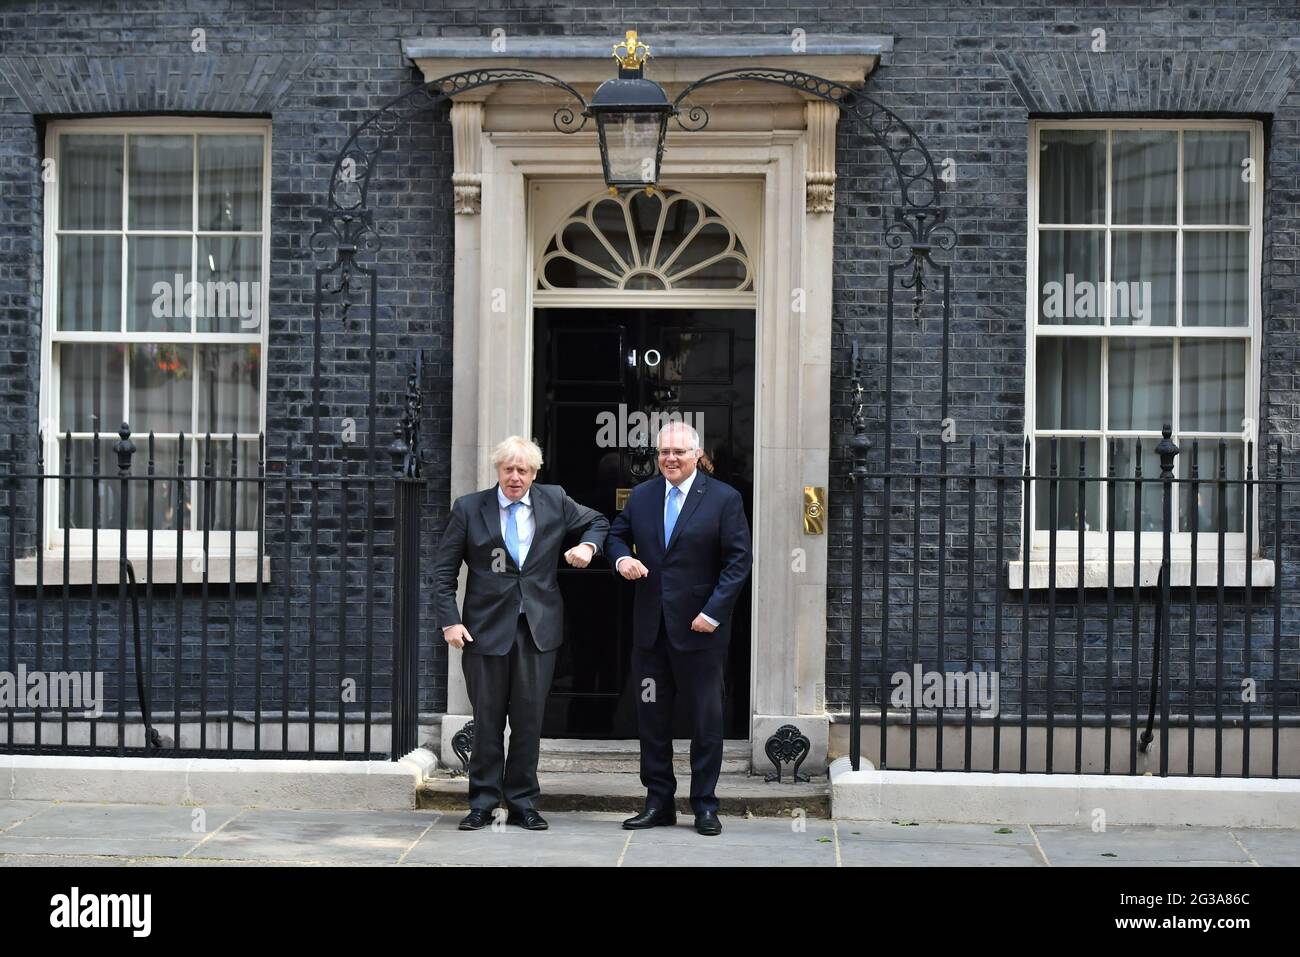 Prime Minister Boris Johnson greets Australian Prime Minister Scott Morrison at 10 Downing Street, London ahead of a meeting to formally announce a trade deal with the UK. It will be the UK's first trade deal negotiated fully since leaving the European Union. Picture date: Tuesday June 15, 2021. Stock Photo